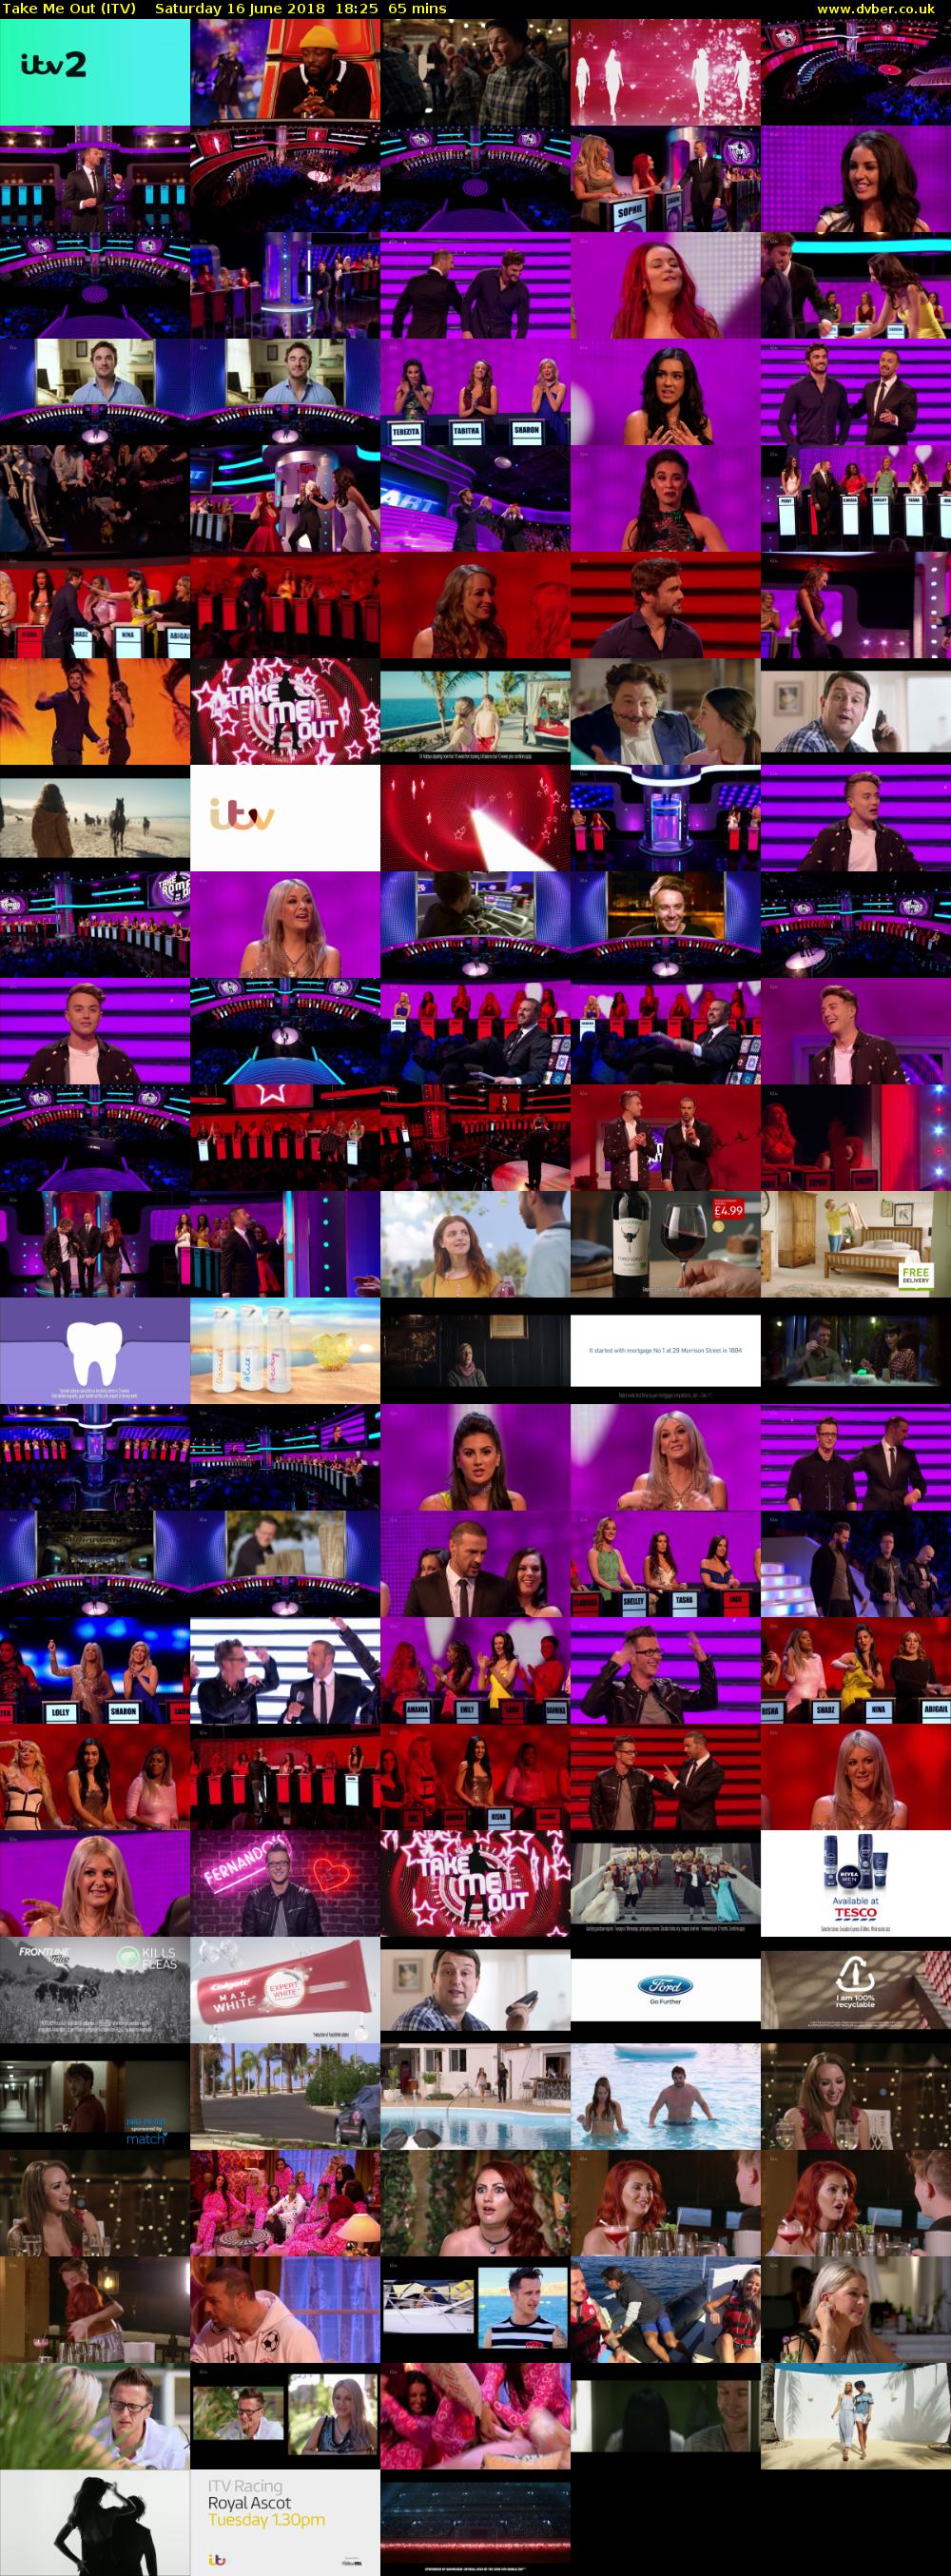 Take Me Out (ITV) Saturday 16 June 2018 18:25 - 19:30